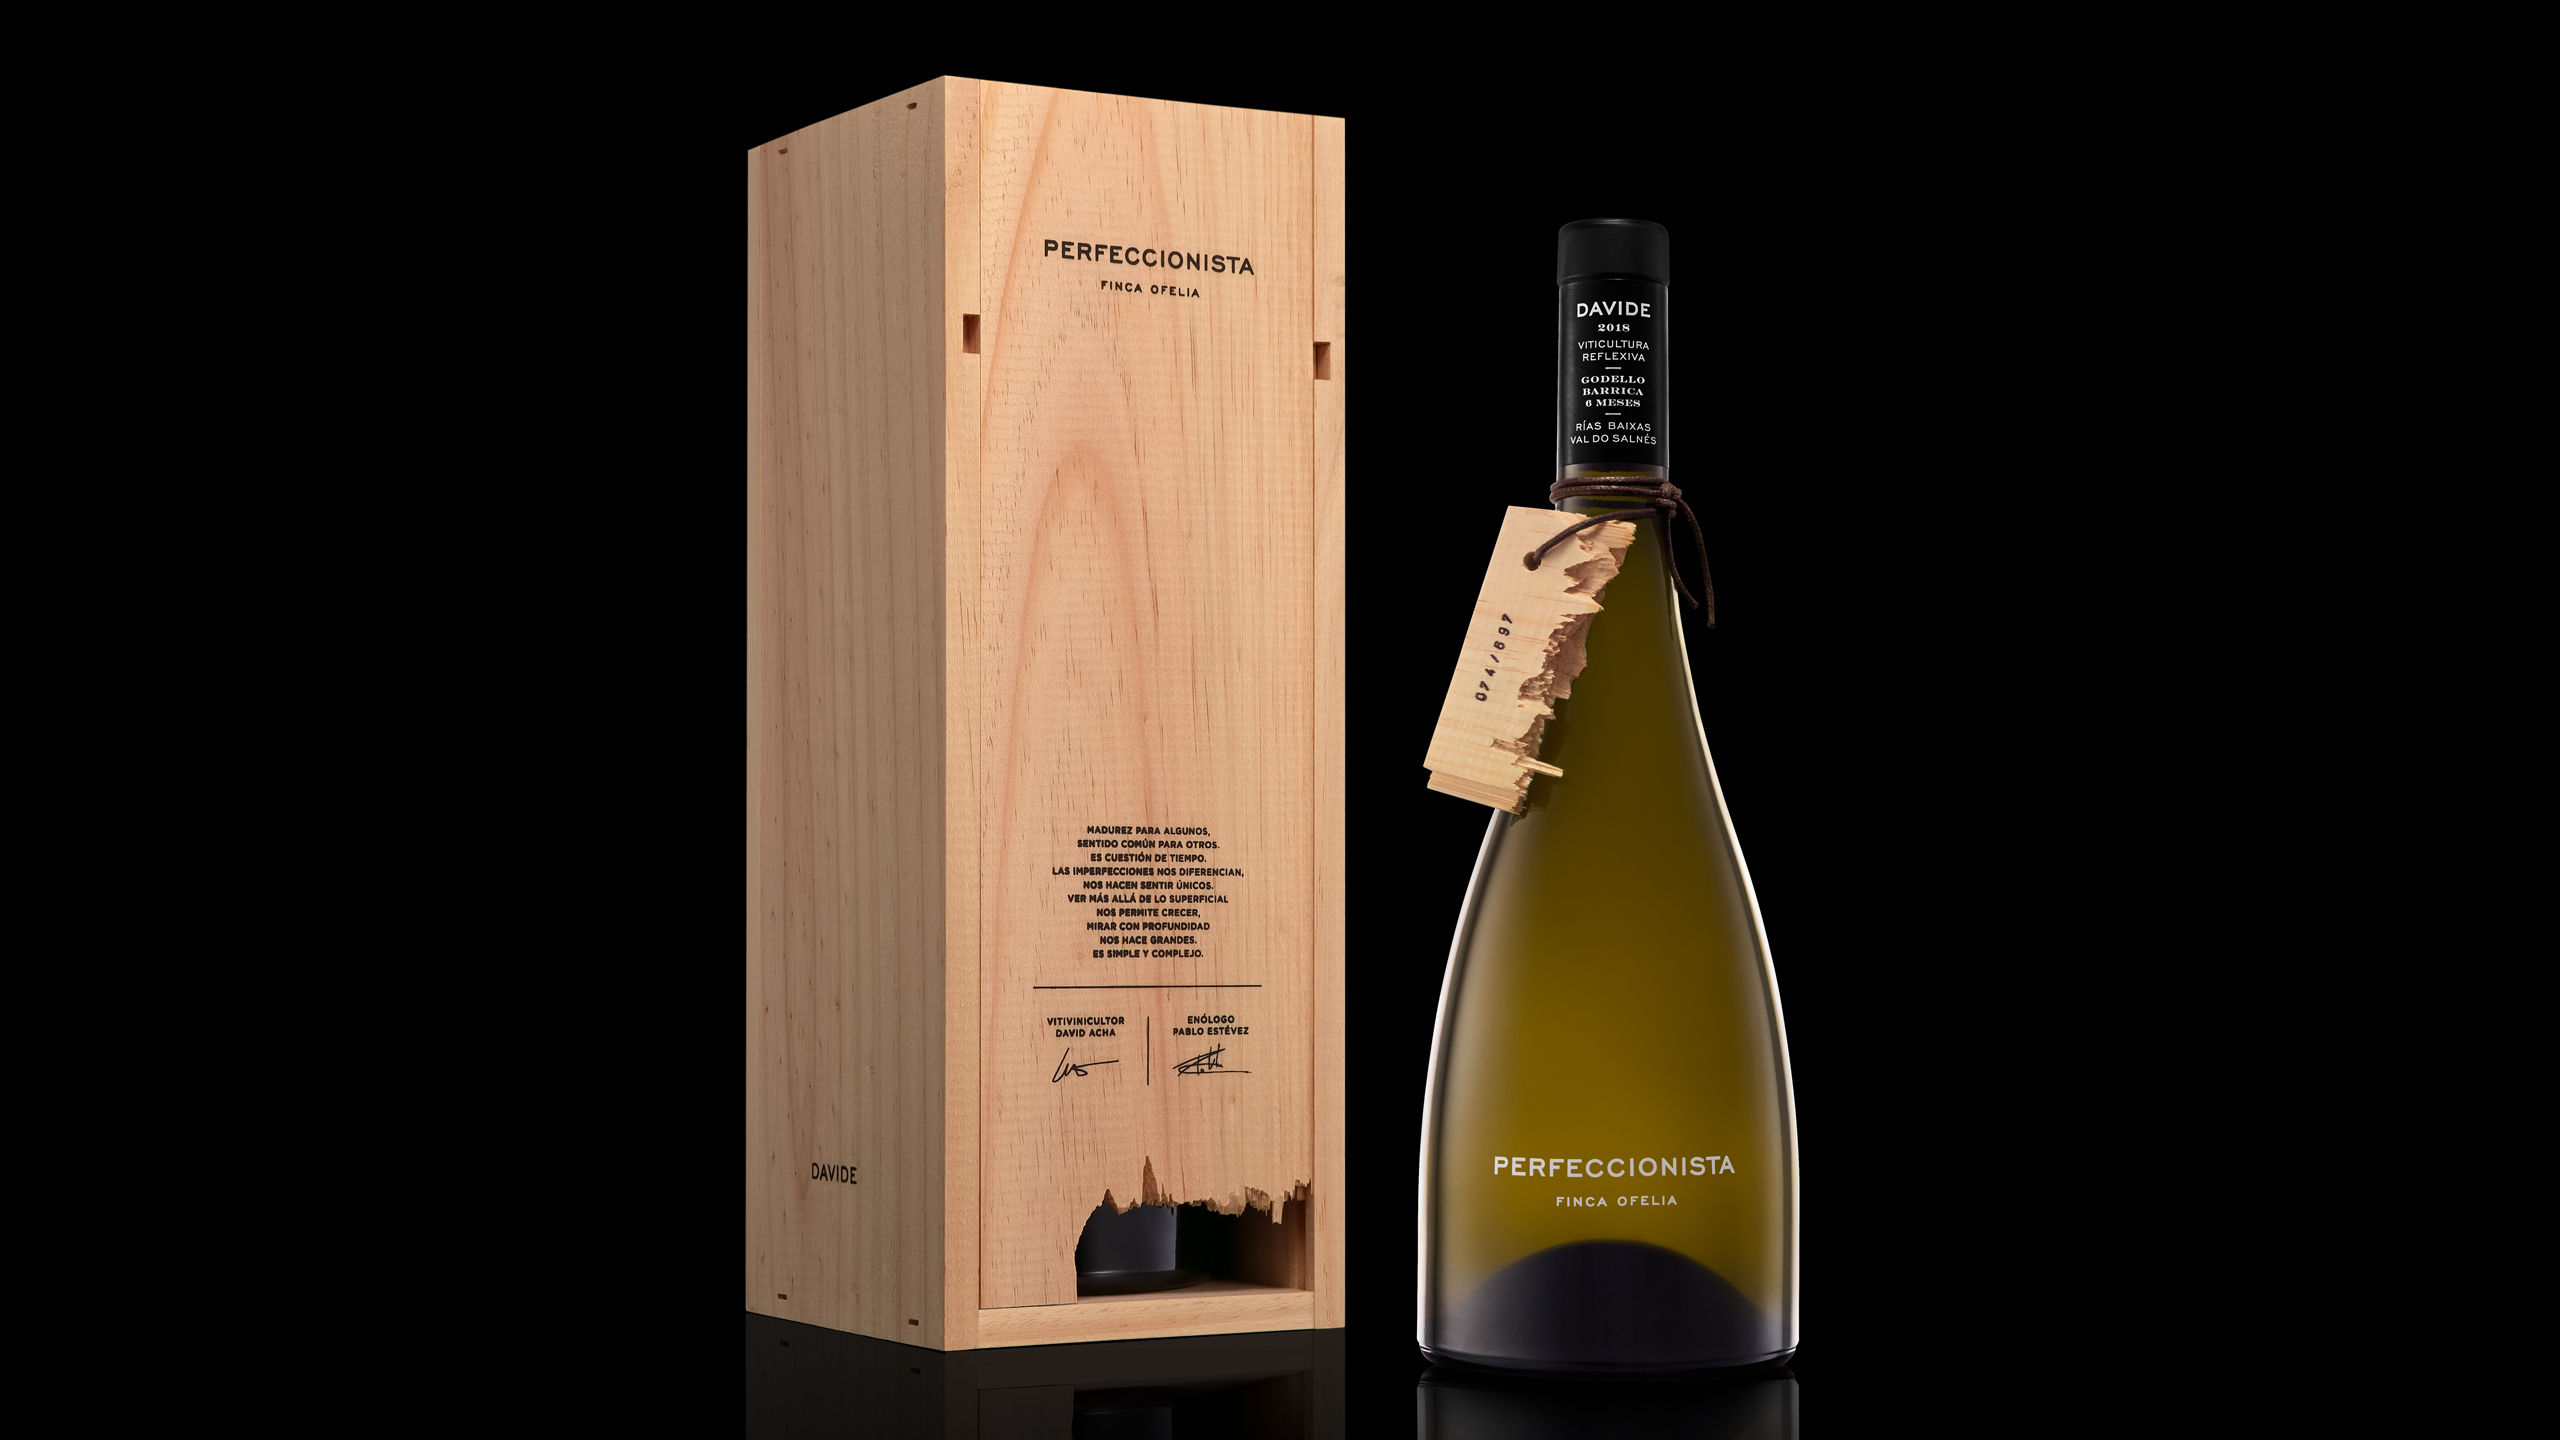 Perfeccionista Wine Finds Beauty In Its Cracks